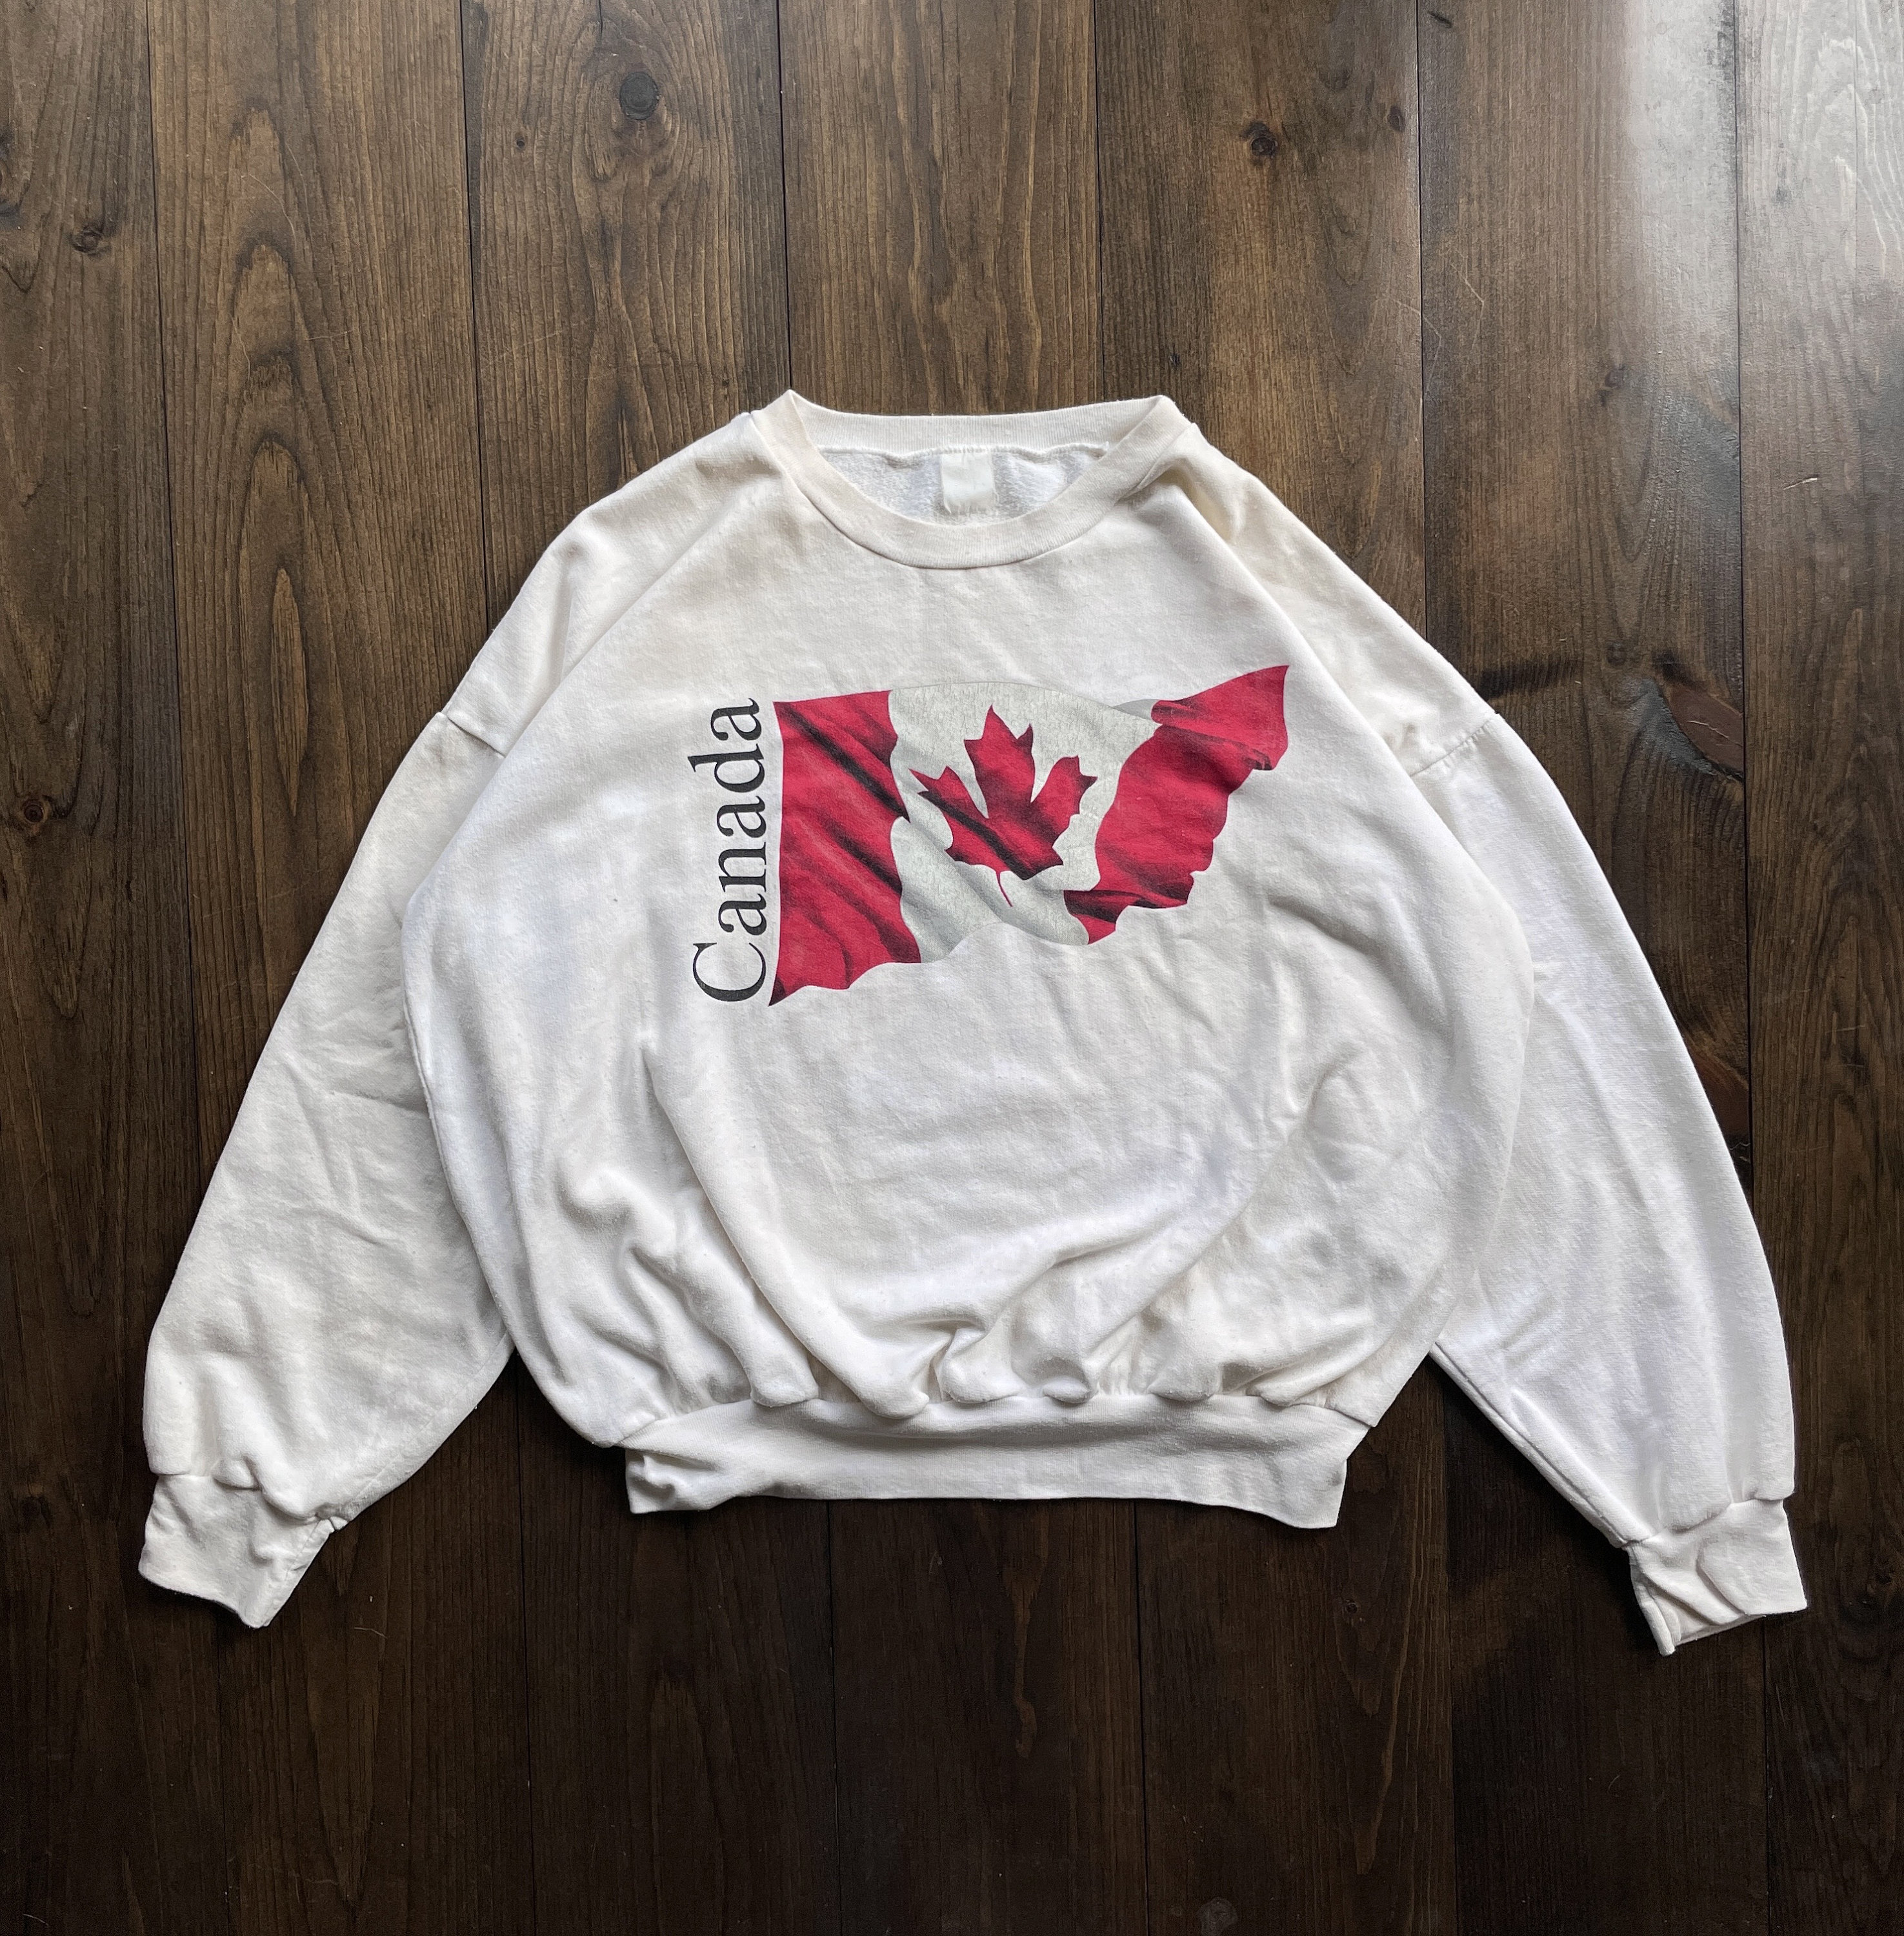 PREOWNED Canada hockey jersey size L red, white, black Maple Leaf Logo 1867